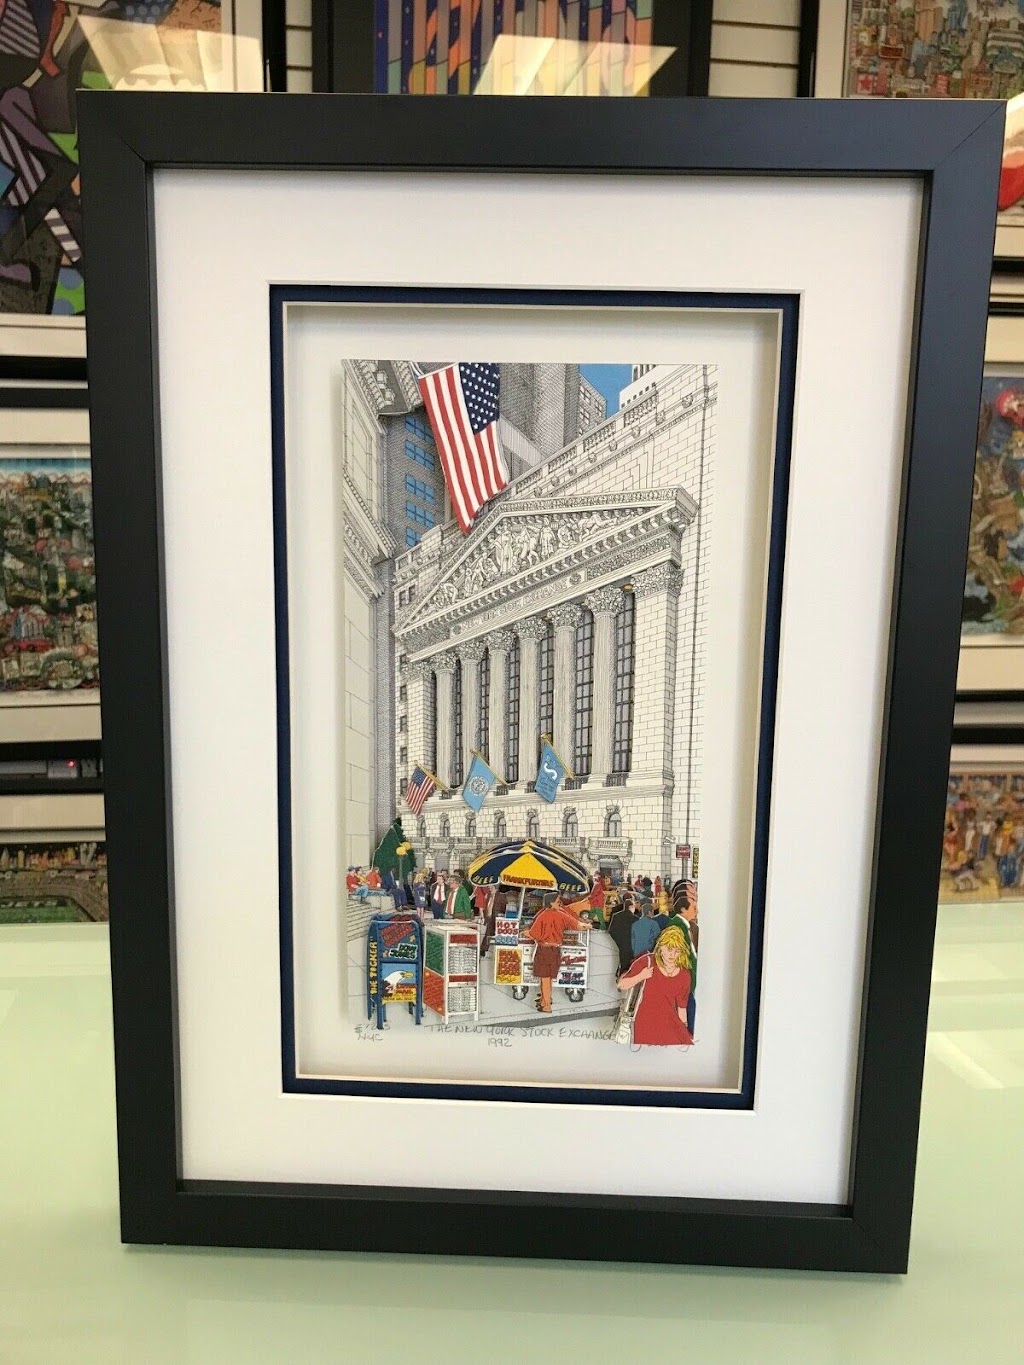 Middle Village Frame Shoppe (MVFS) | 75-19 68th Ave, Queens, NY 11379 | Phone: (718) 326-5721